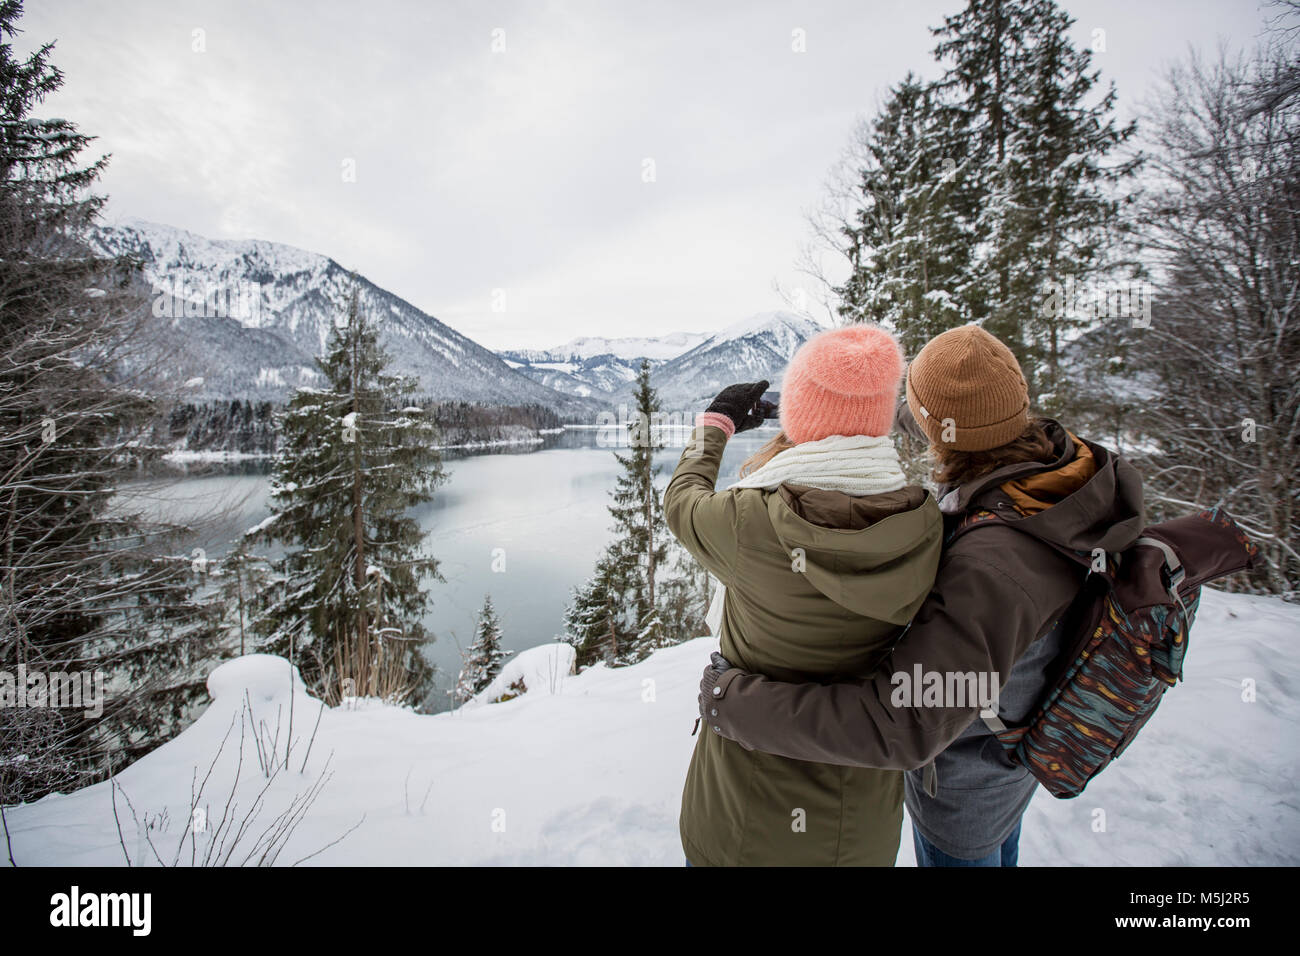 Couple taking a picture in alpine winter landscape with lake Stock Photo